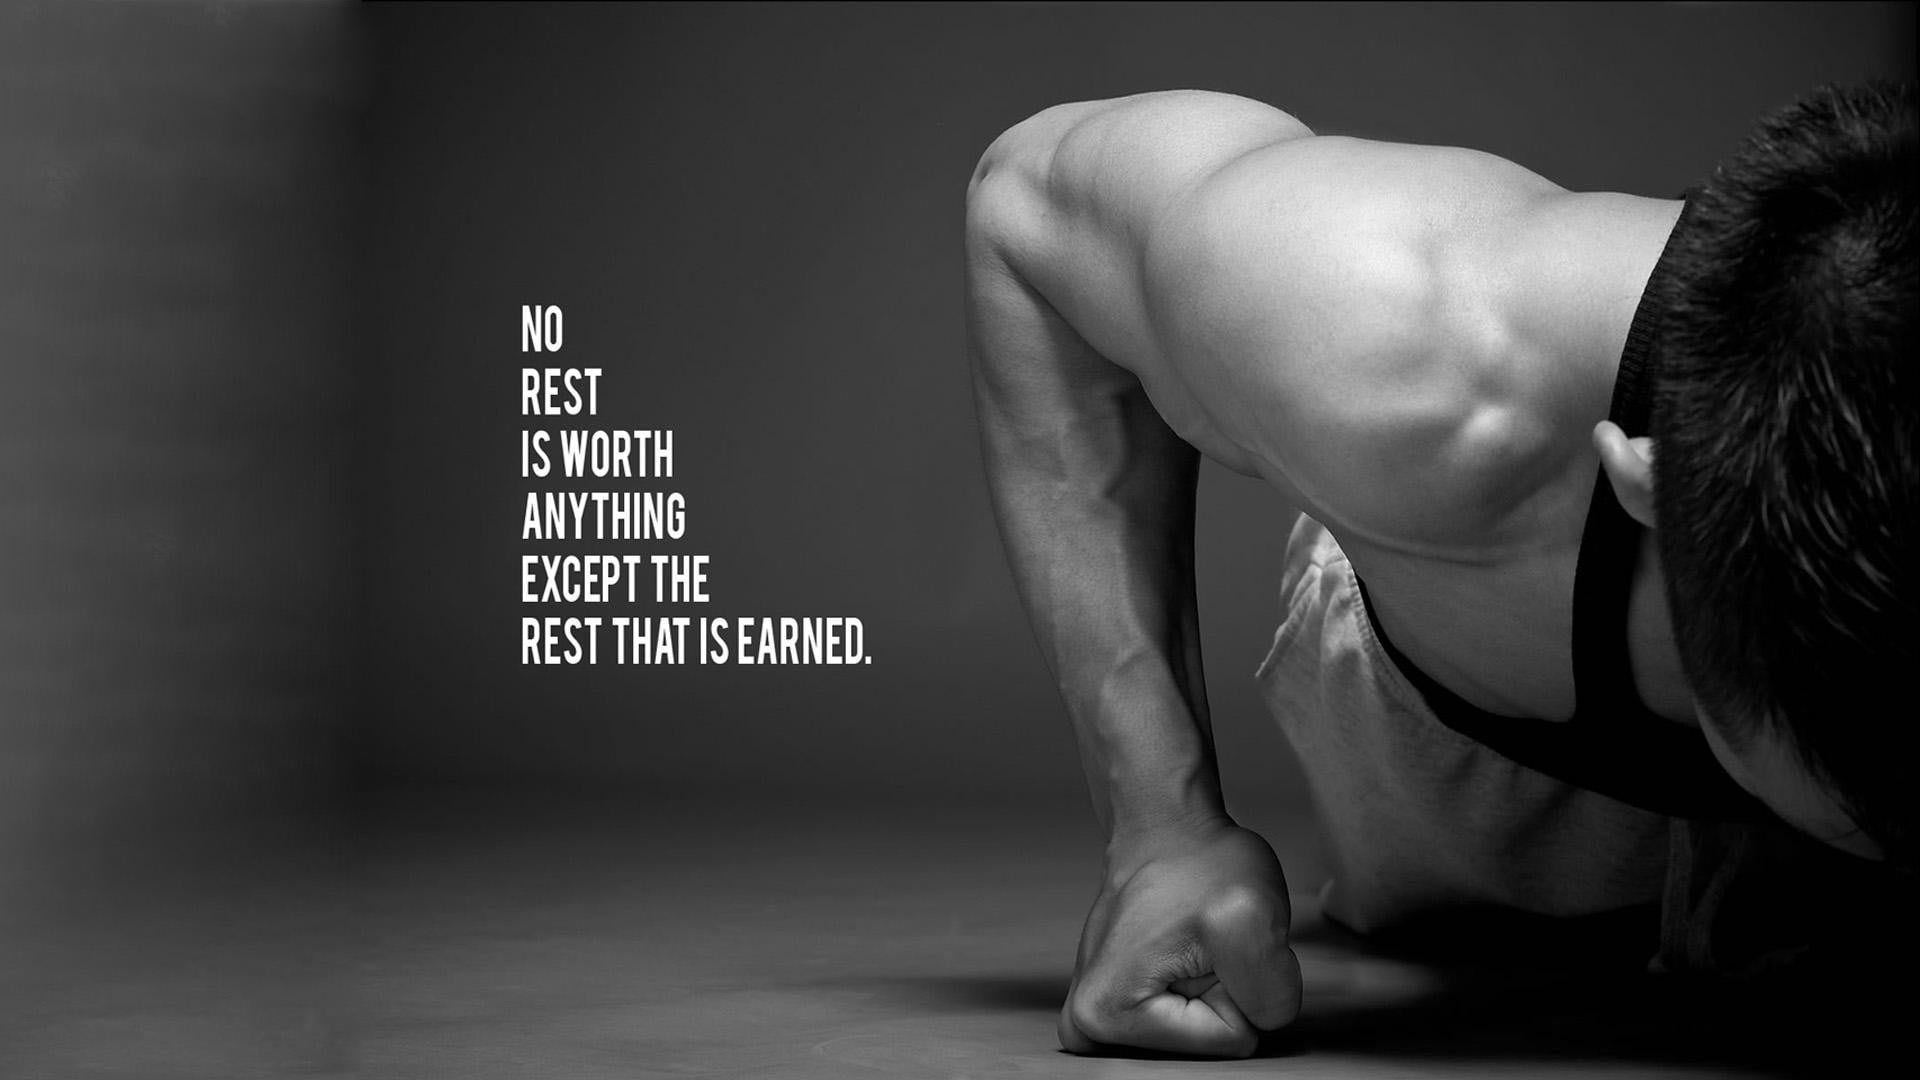 No rest is worth anything except the rest that is earned wallpaper